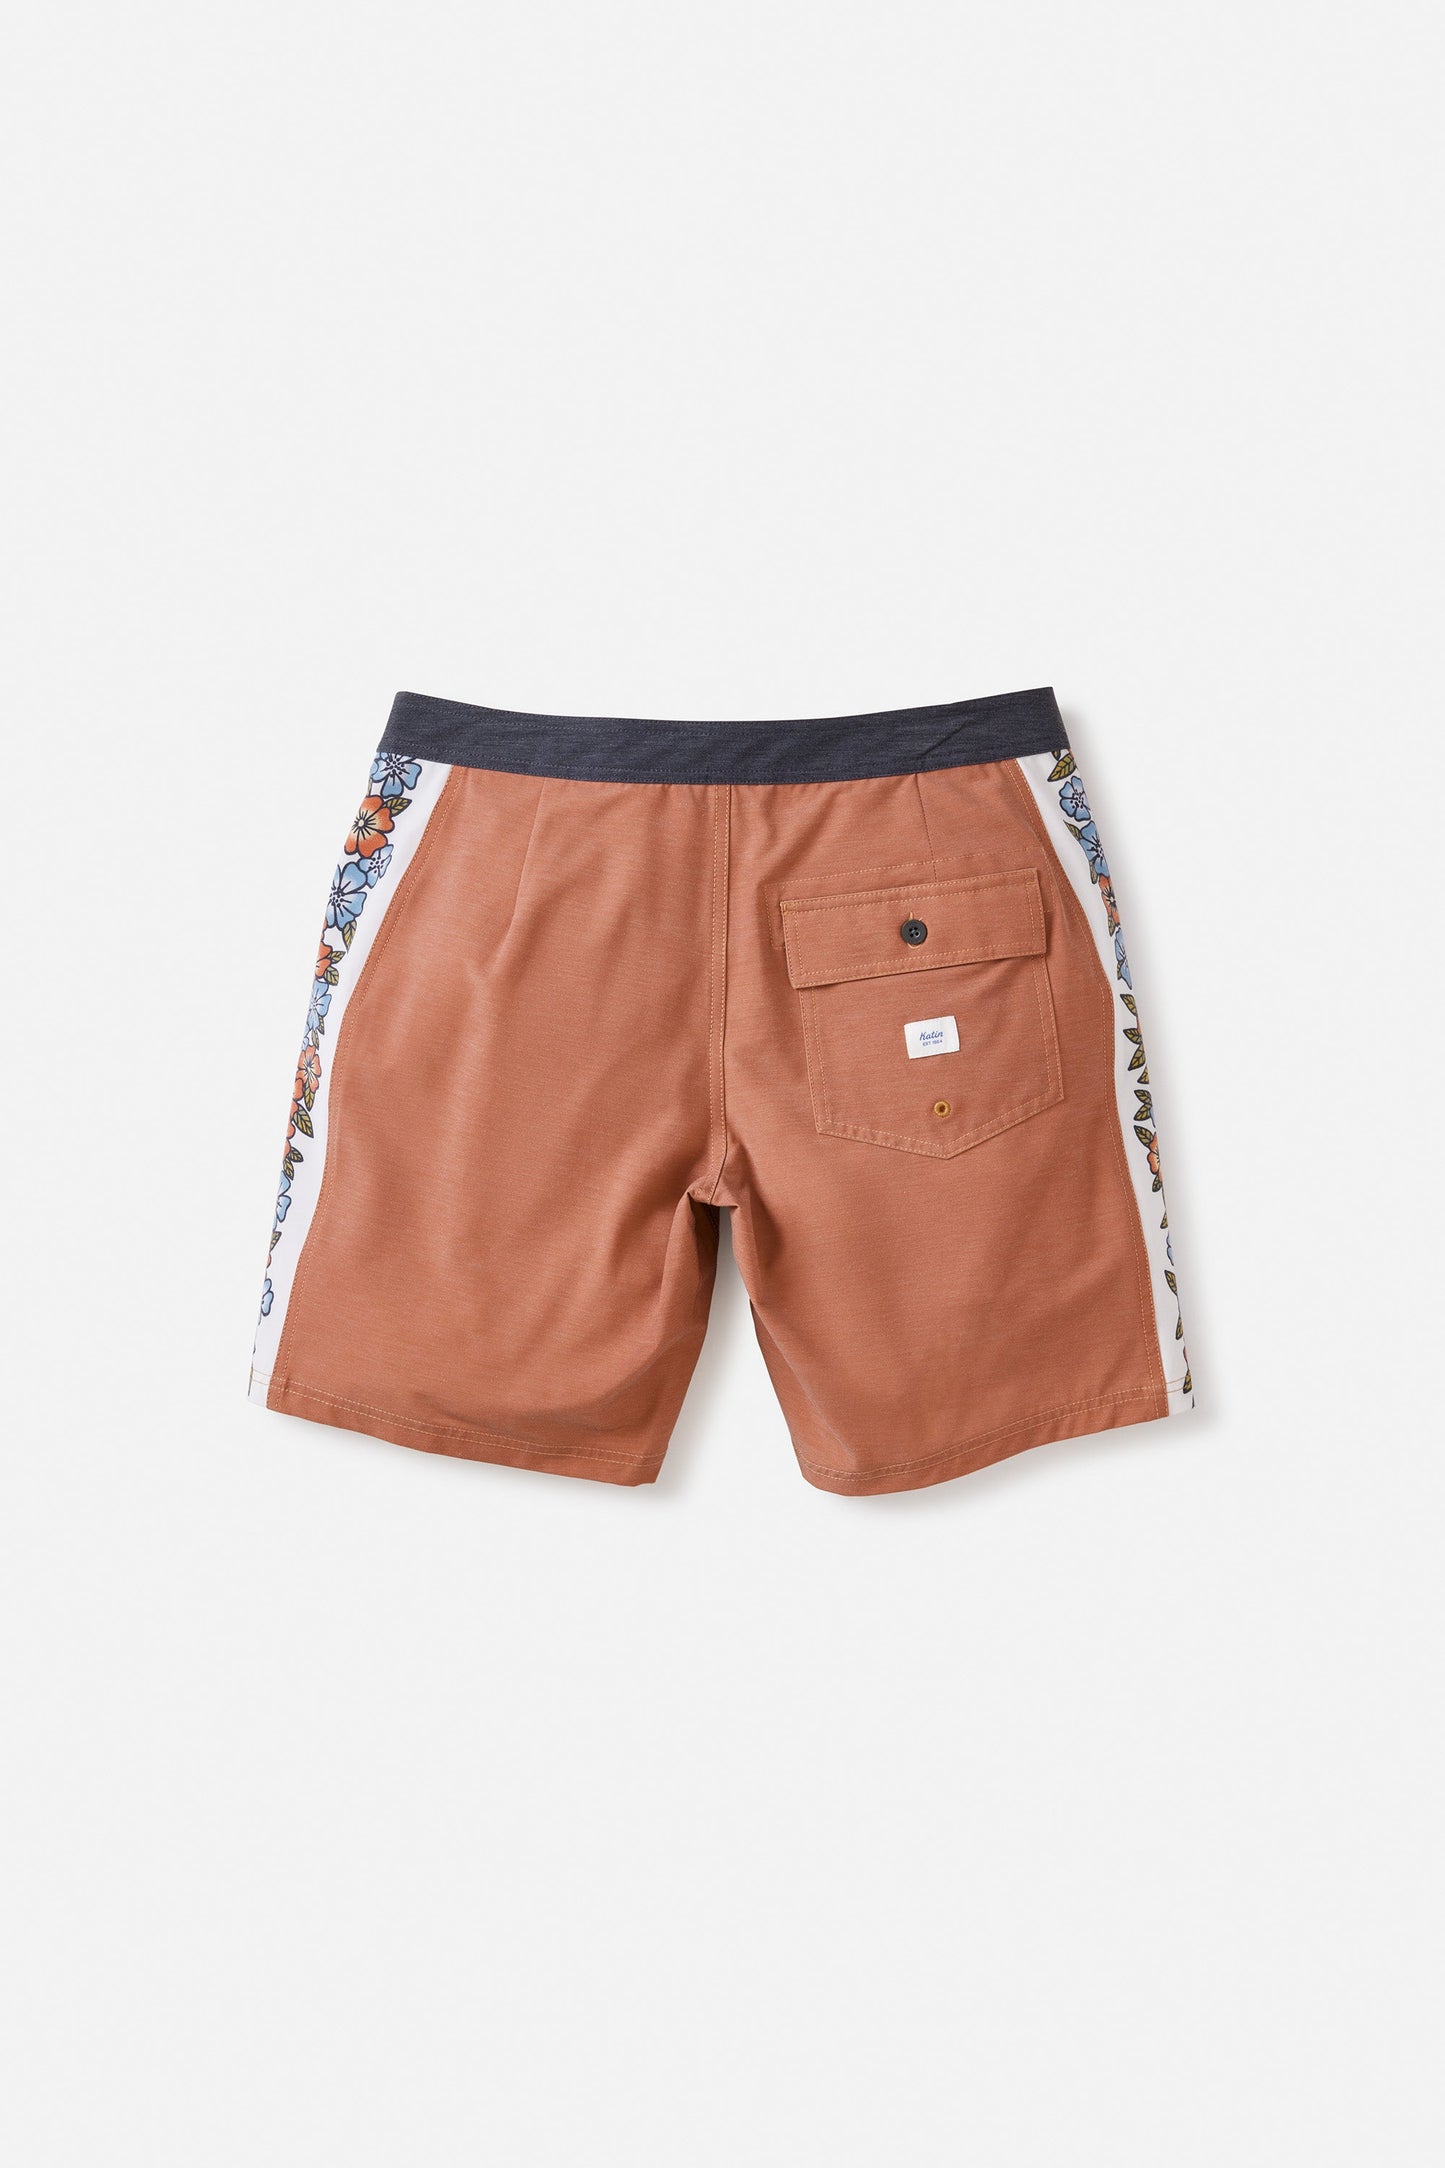 Katin M Vine Trunk RED CLAY